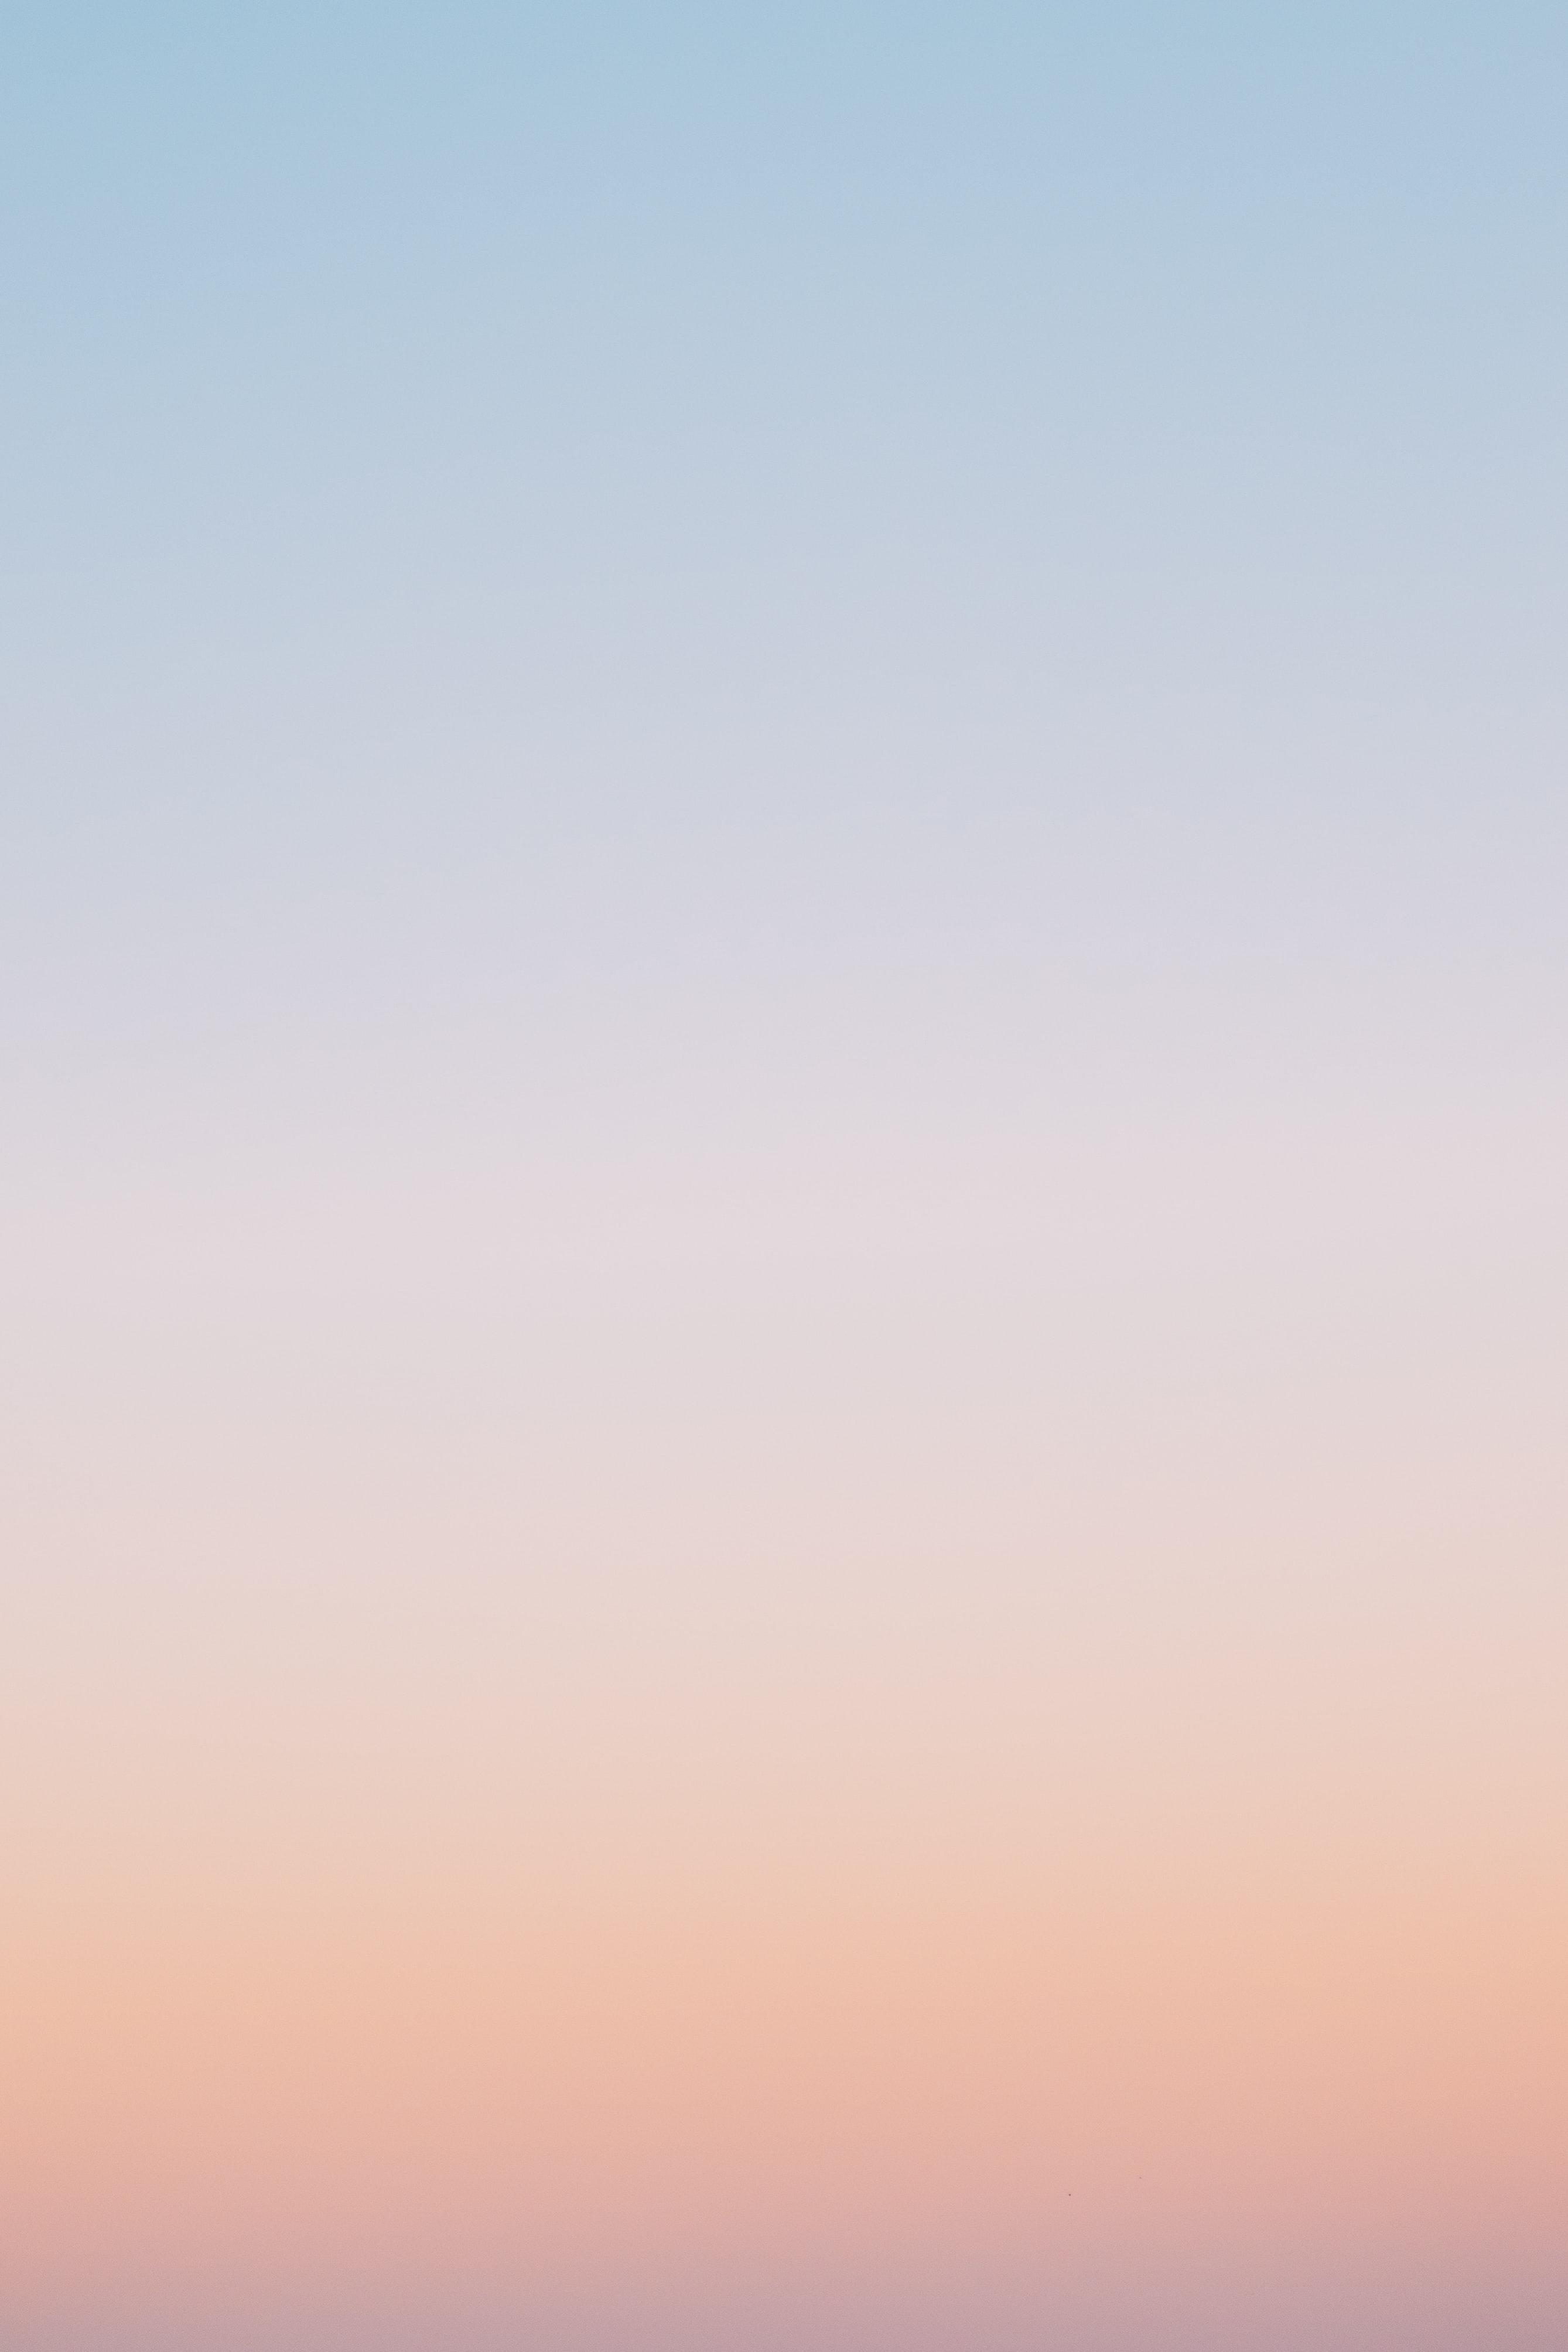 1920x1080 Background gradient, abstract, background, sky, pink, blue